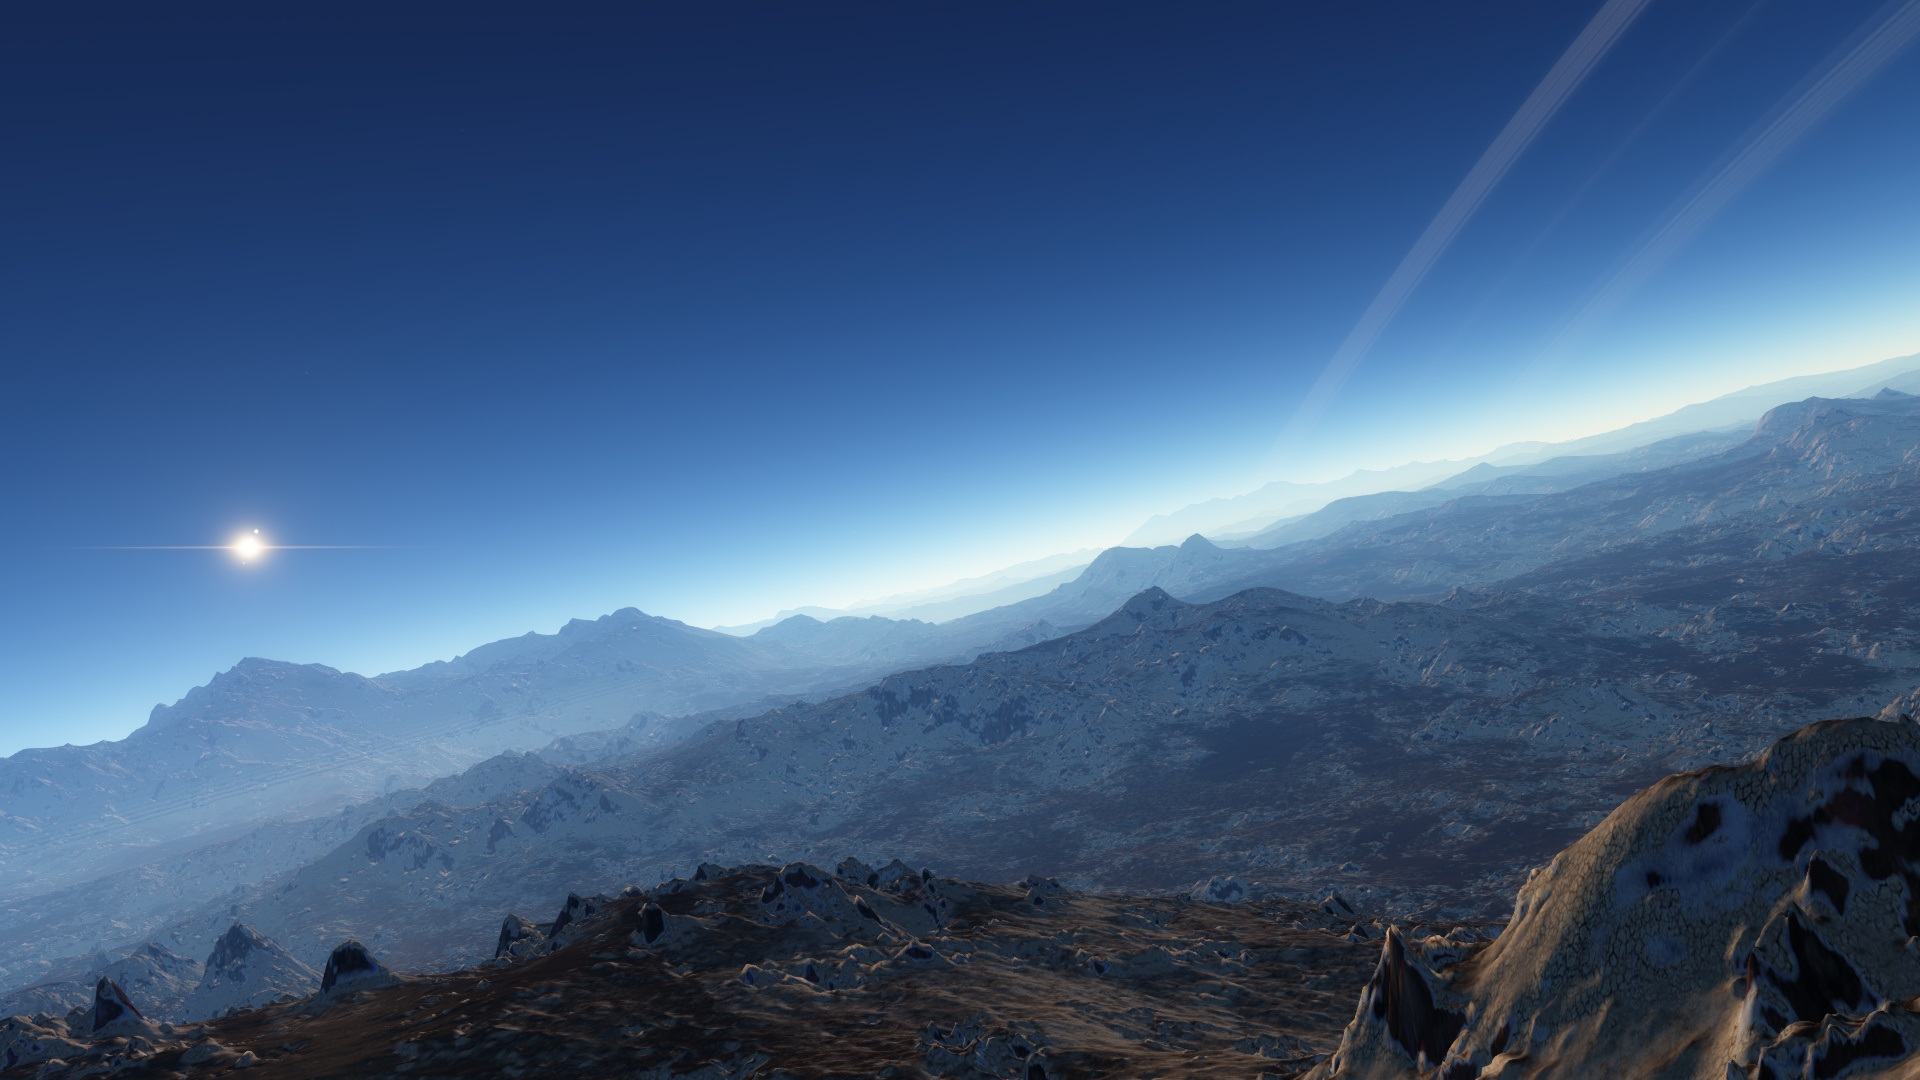 Video Game Space Engine HD Wallpaper | Background Image